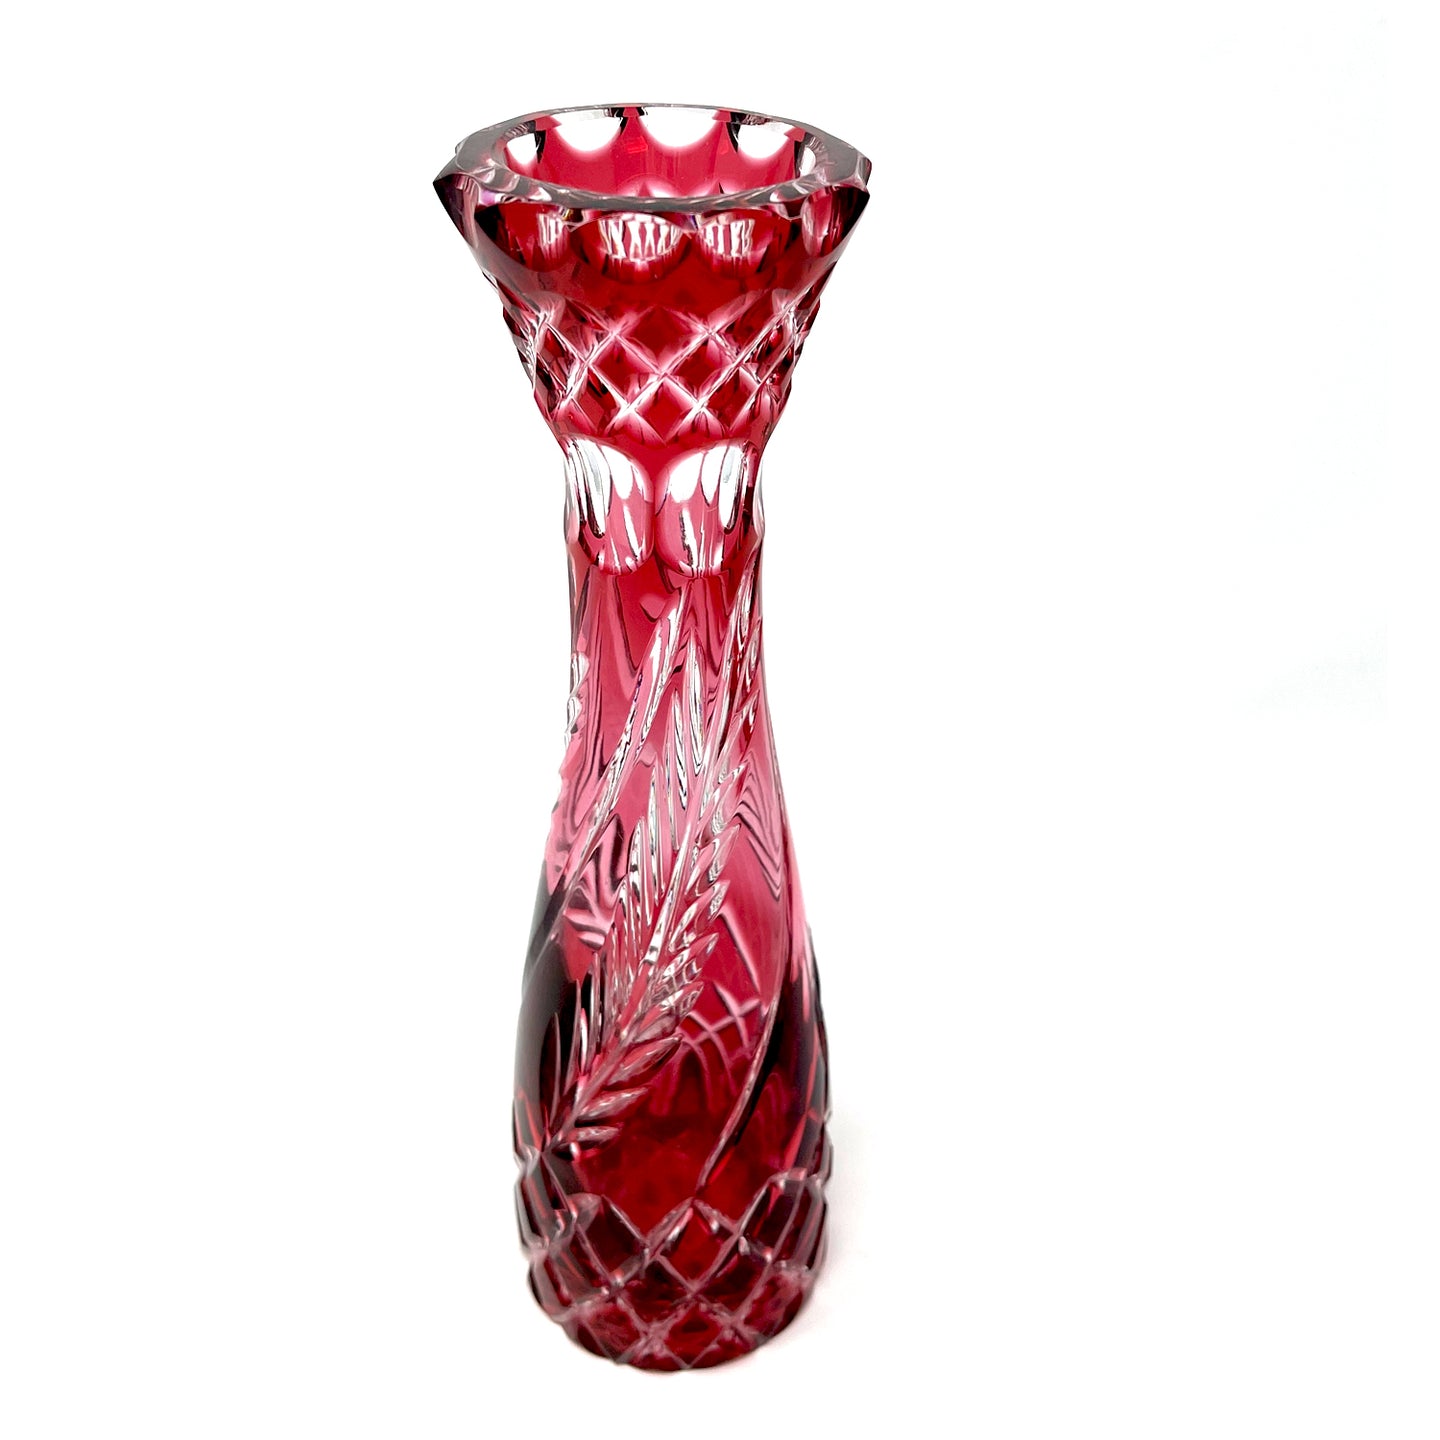 Red Wheat Flask Vase - 50th Anniversary Piece